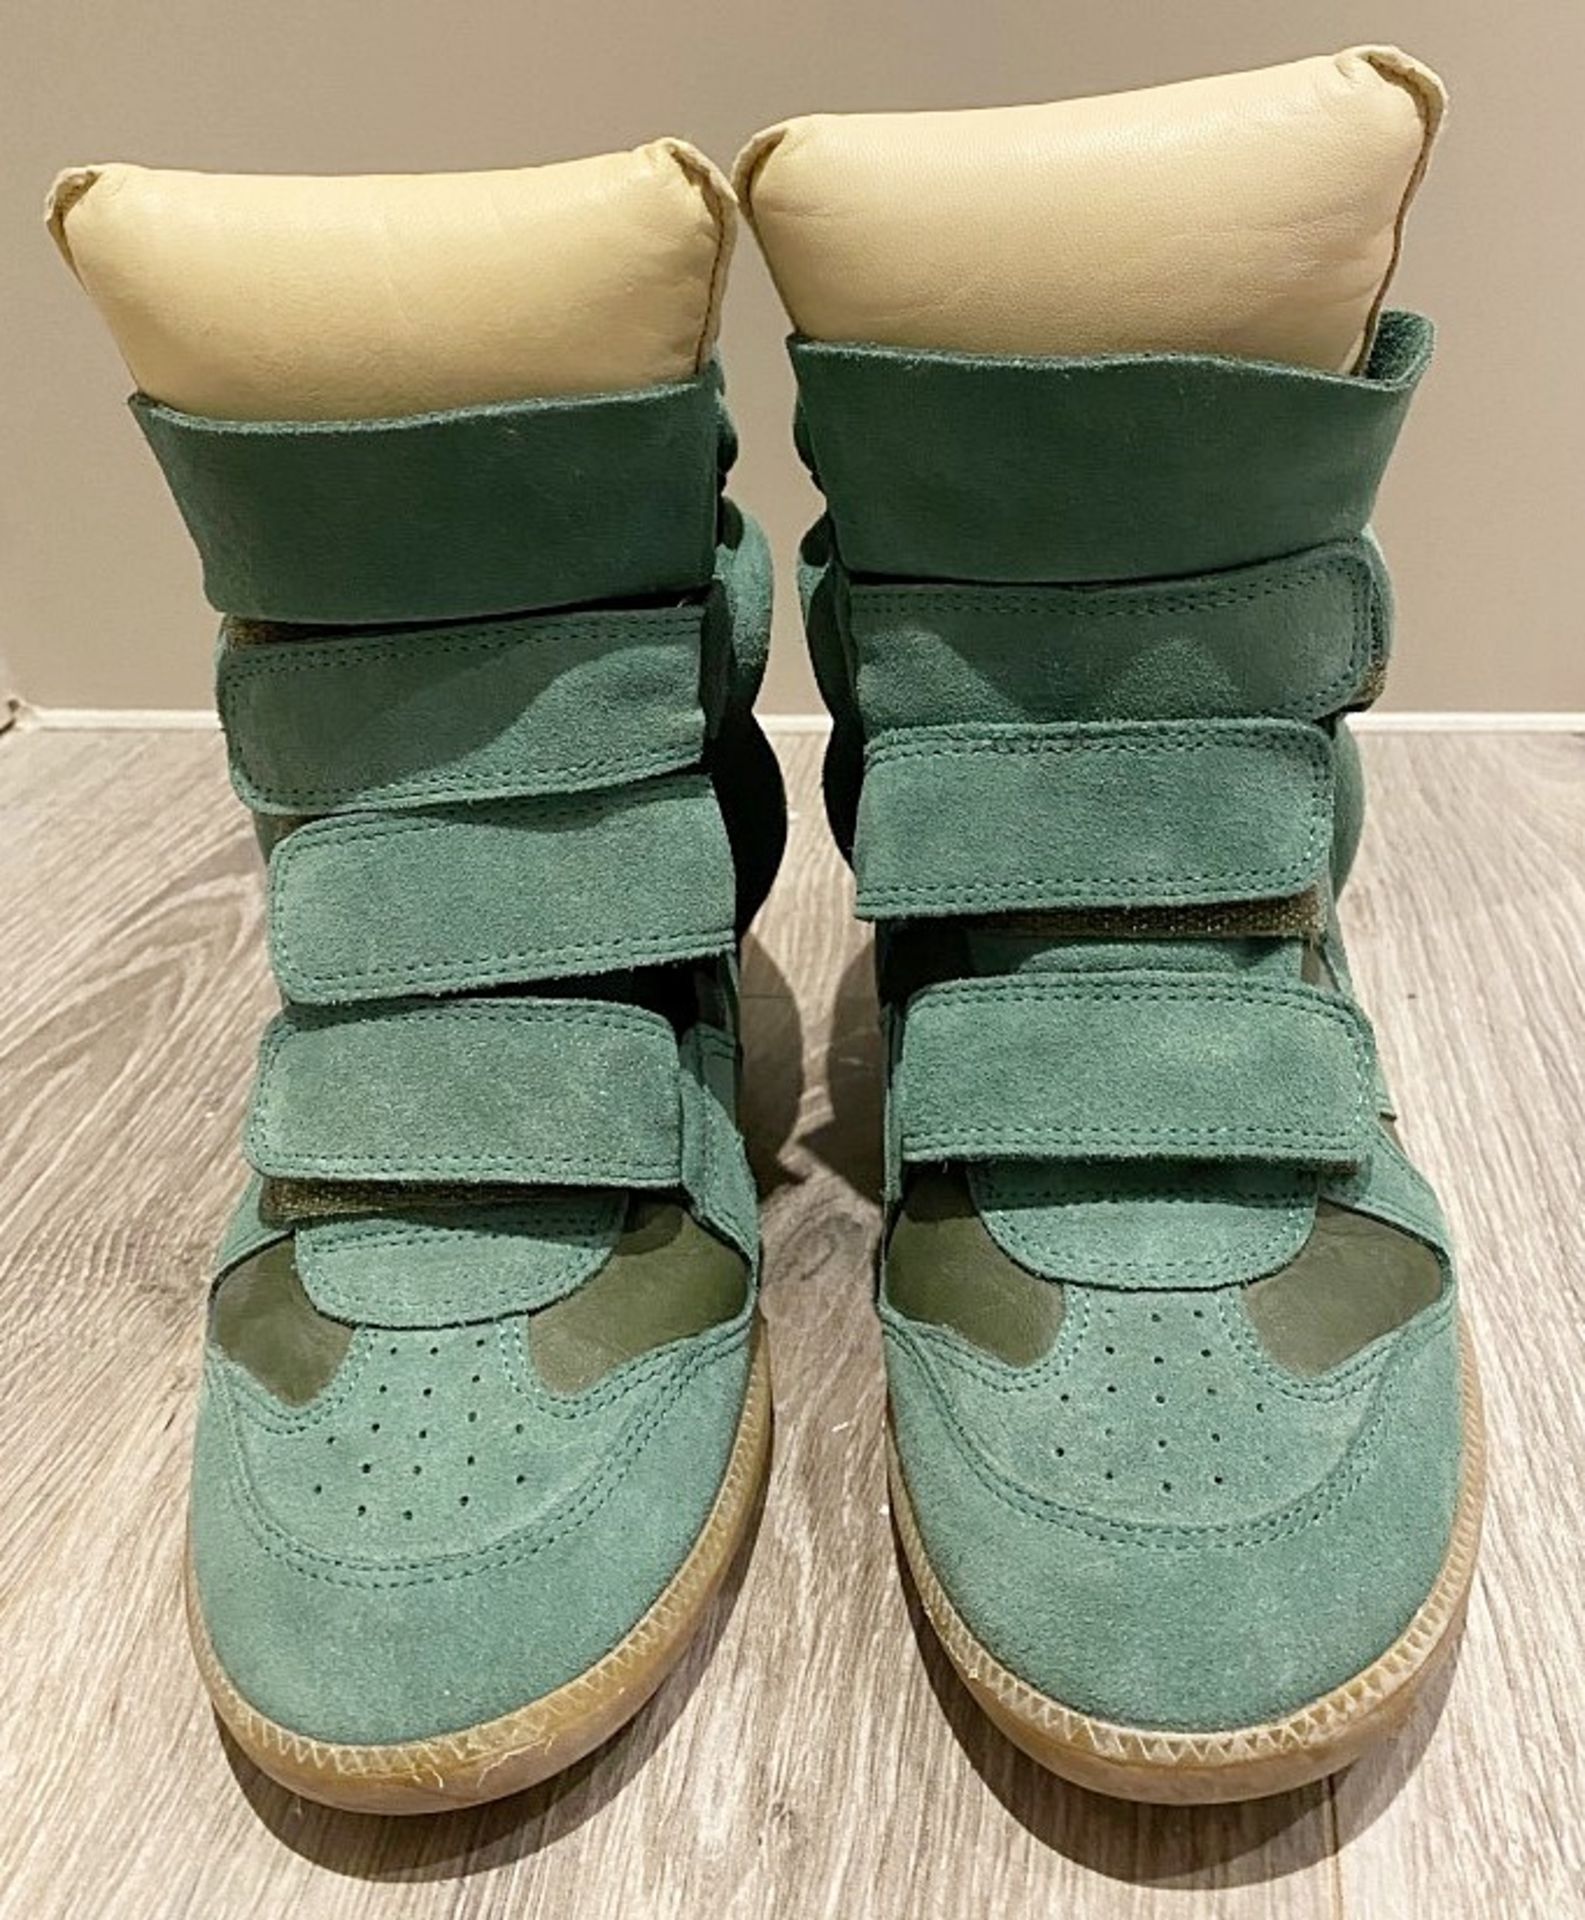 1 x Pair Of Genuine Isabel Marant Boots In Green - Size: 36 - Preowned in Good Condition - Ref: LOT3 - Image 3 of 4